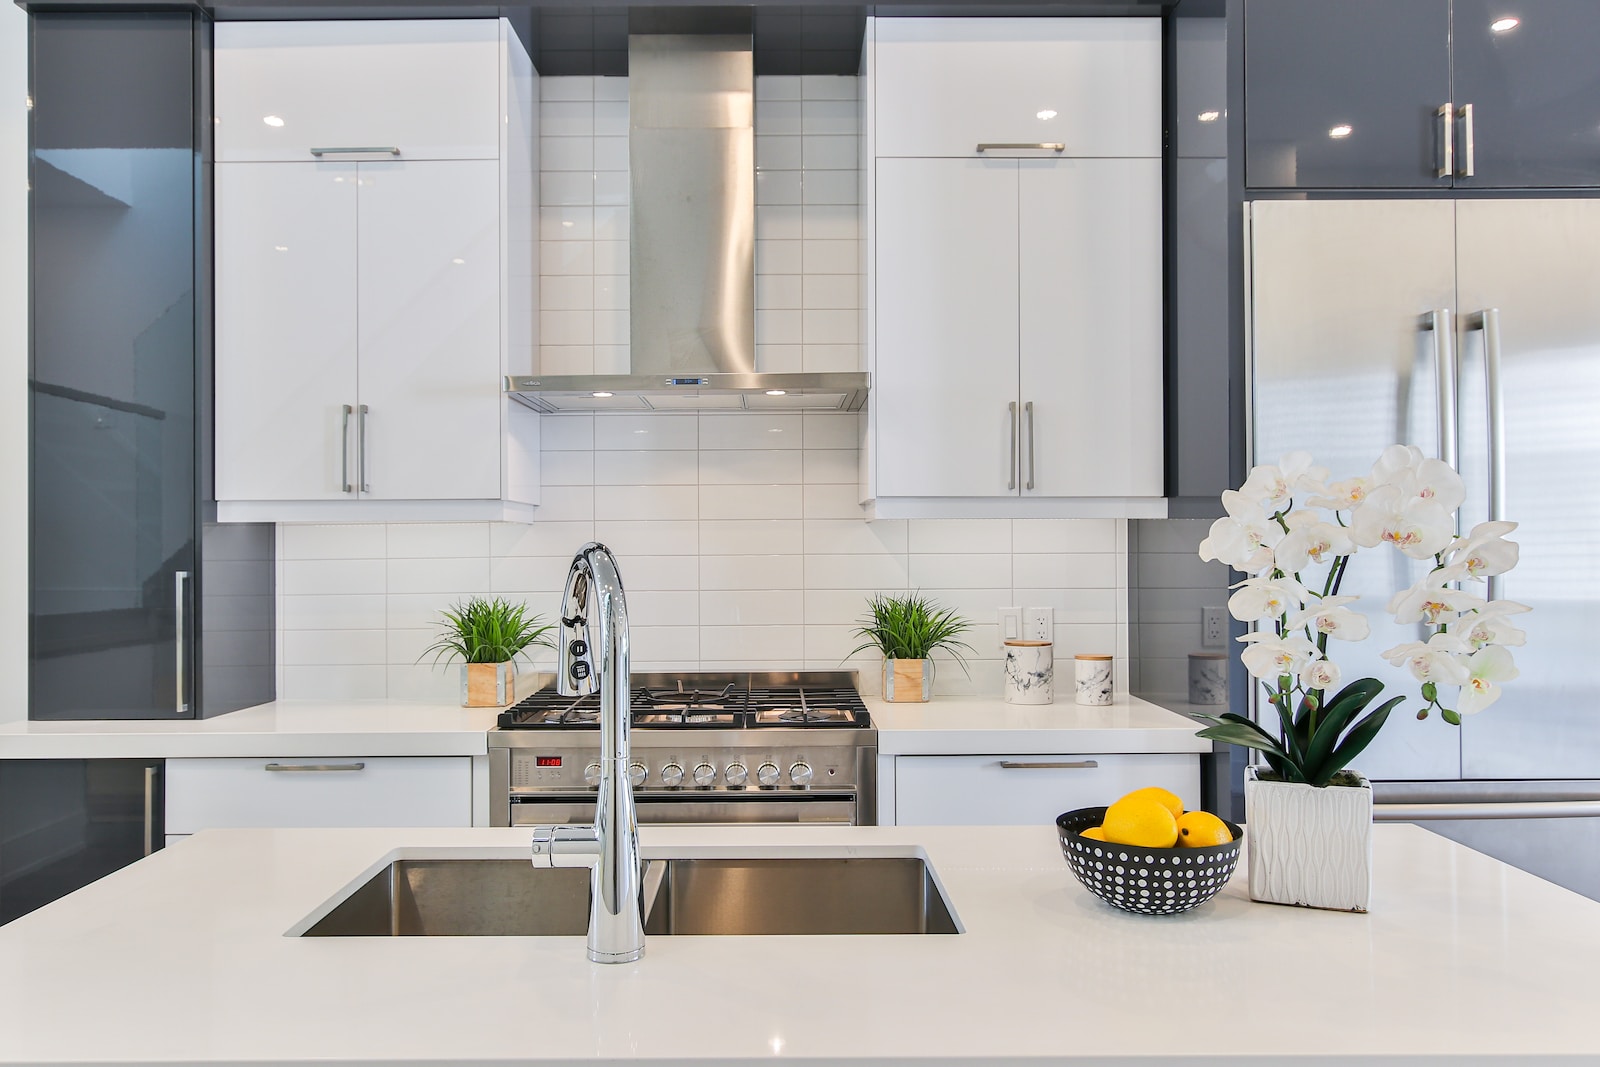 Kitchen Cleaning Services Near Me: Finding Reliable Options